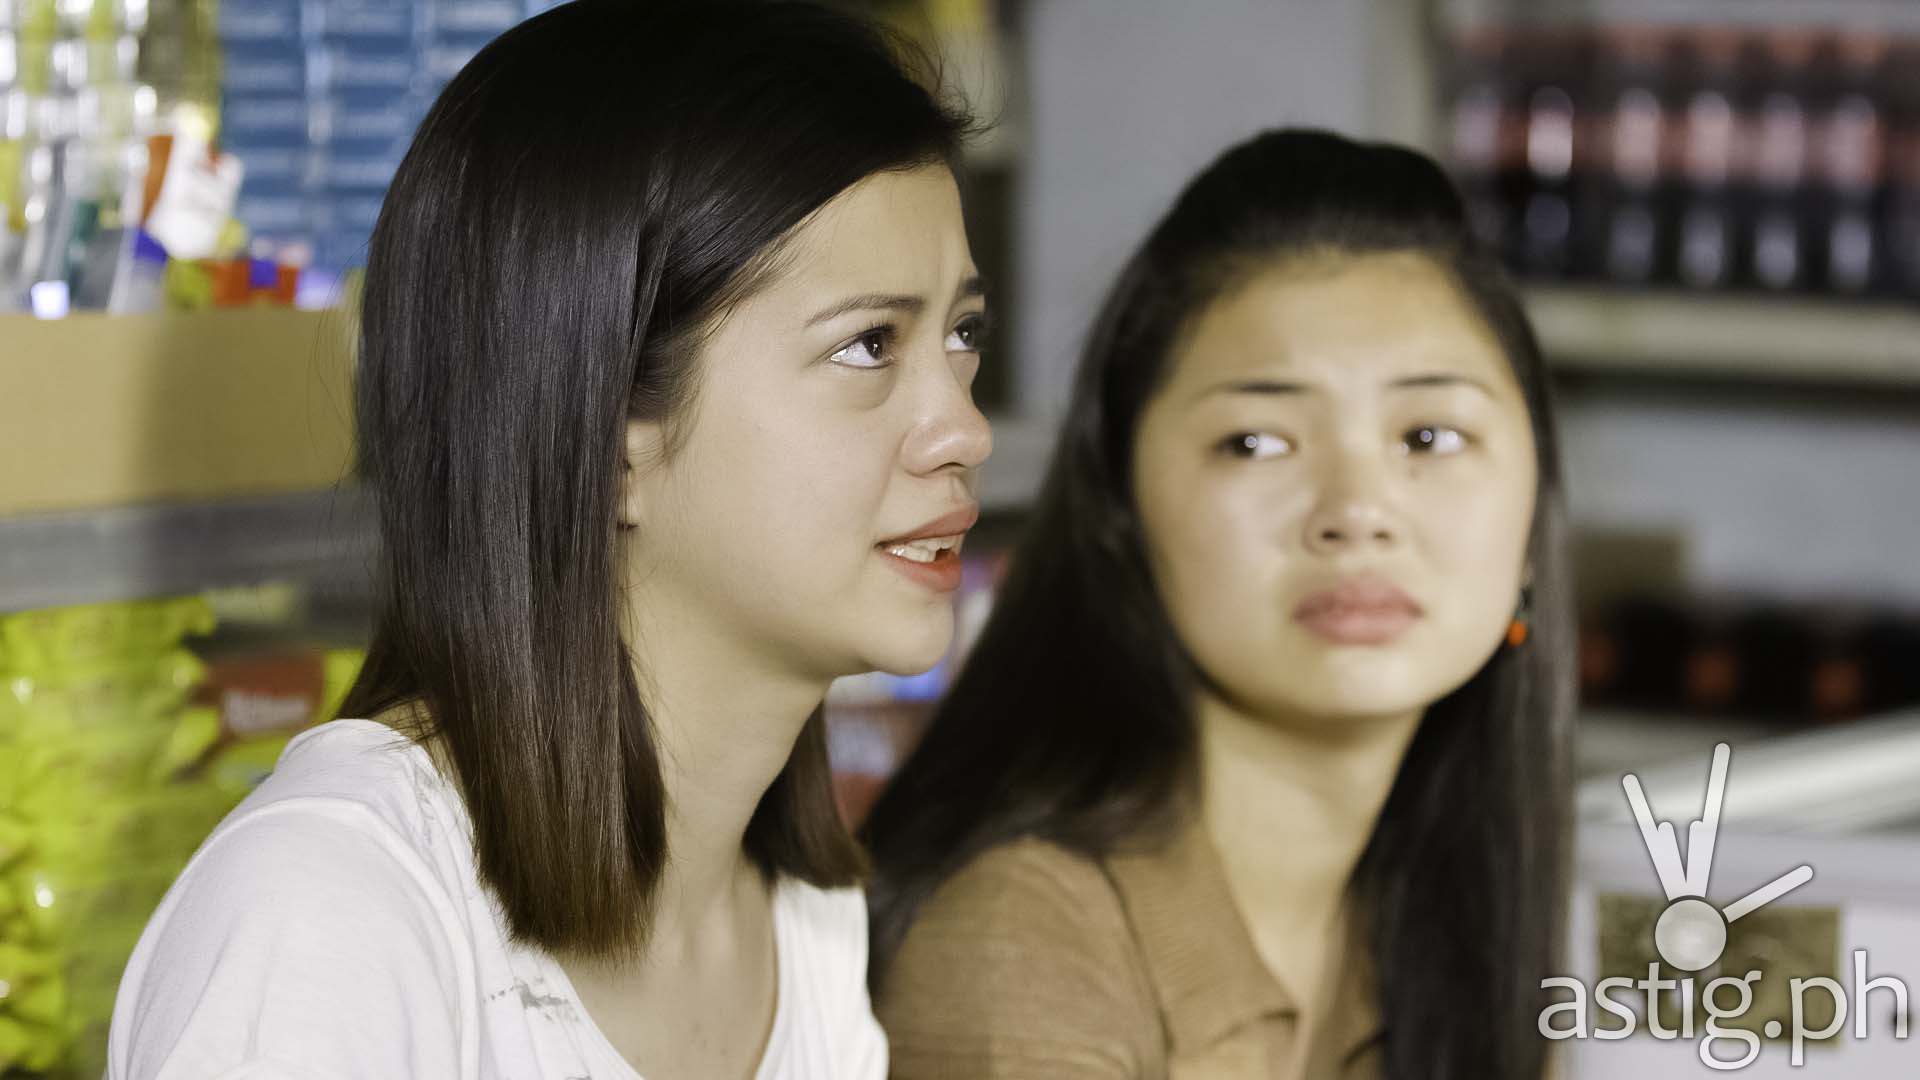 Sue Ramirez and Celine Lim will topbill this Saturday's episode of MMK